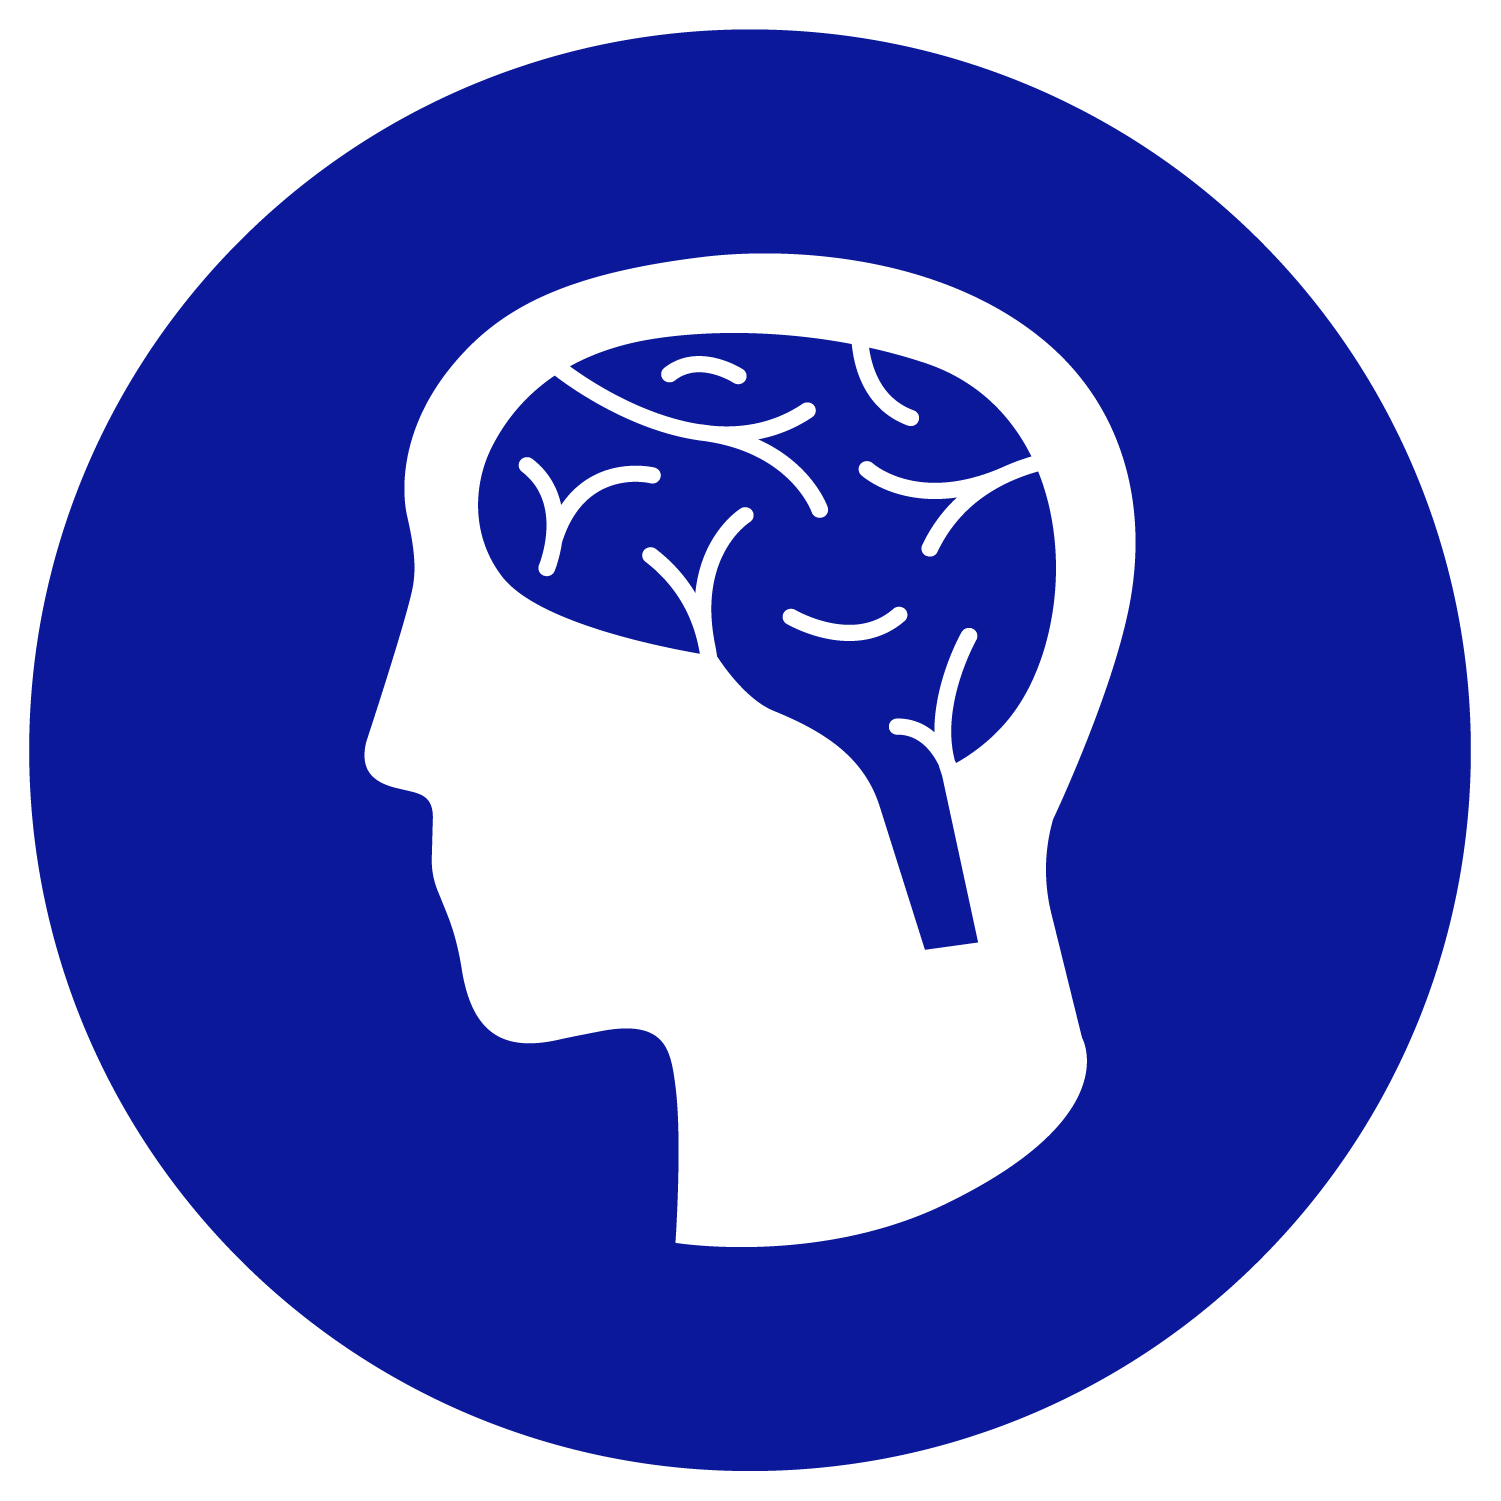 circular blue icon with a white, side-view silhouette of a head and neck with a blue brain shape inside